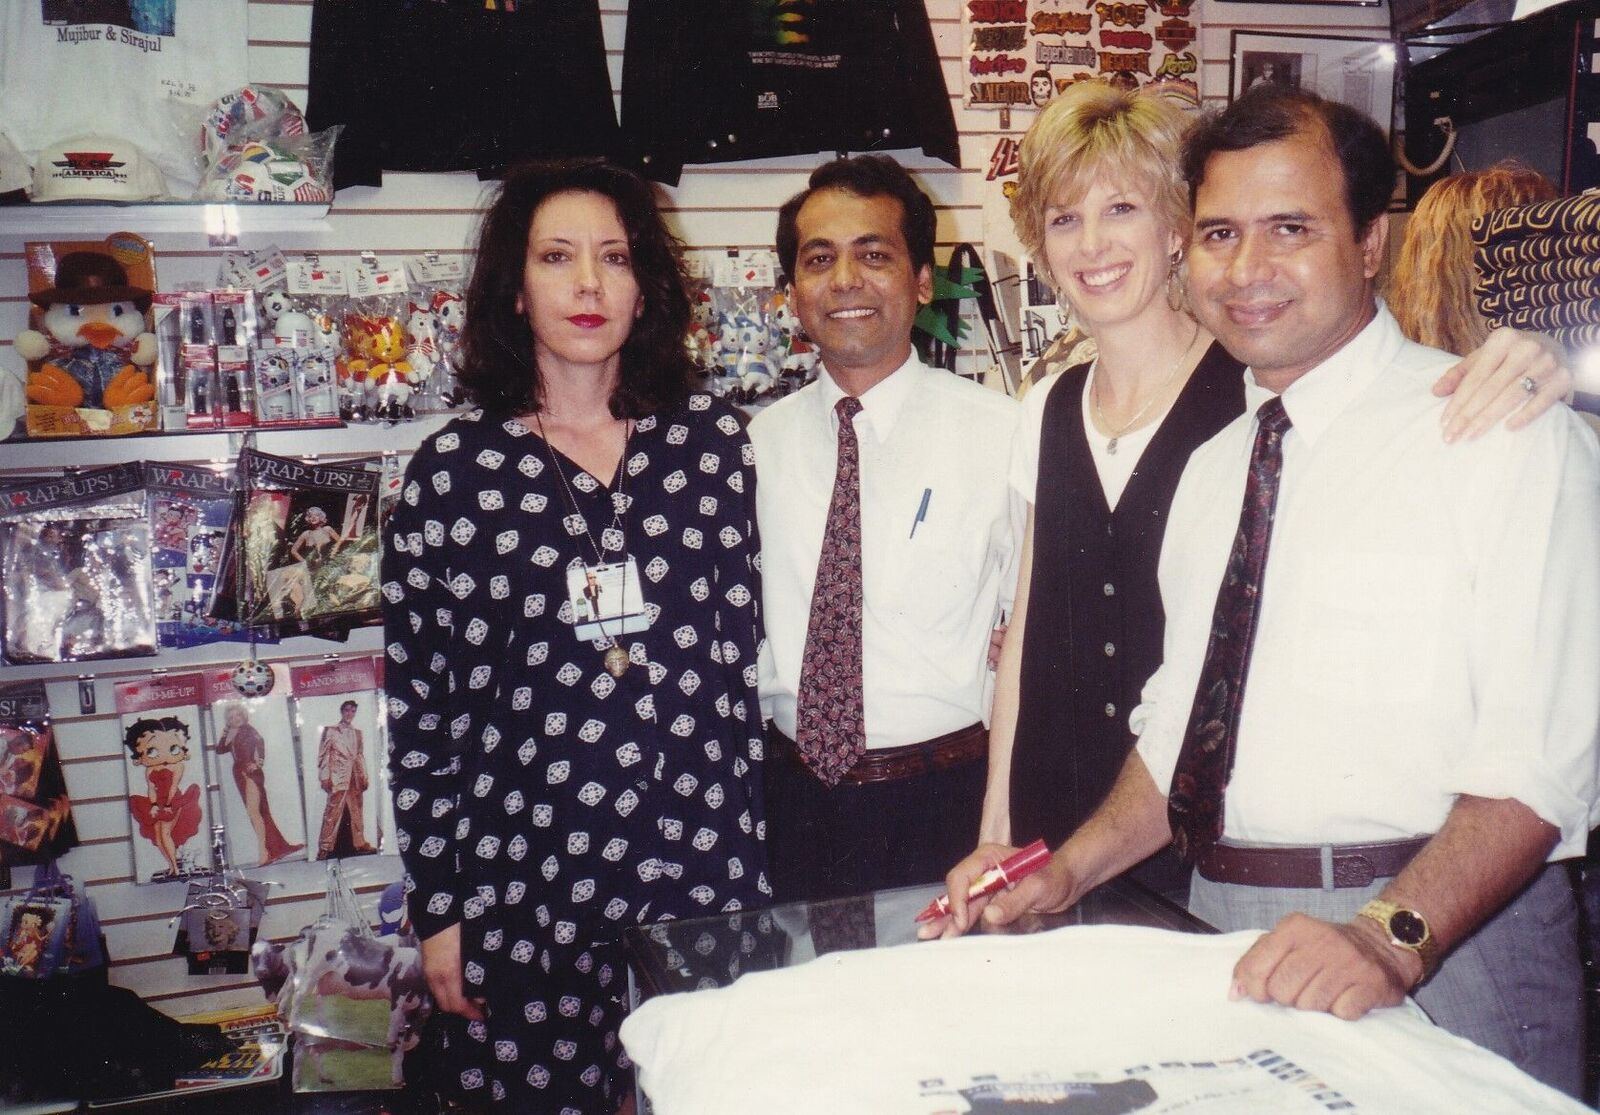 Mujibur Rahman and Sirajul Islam employed at souvenir shop K&L's Rock America, were frequent guests of David Letterman.